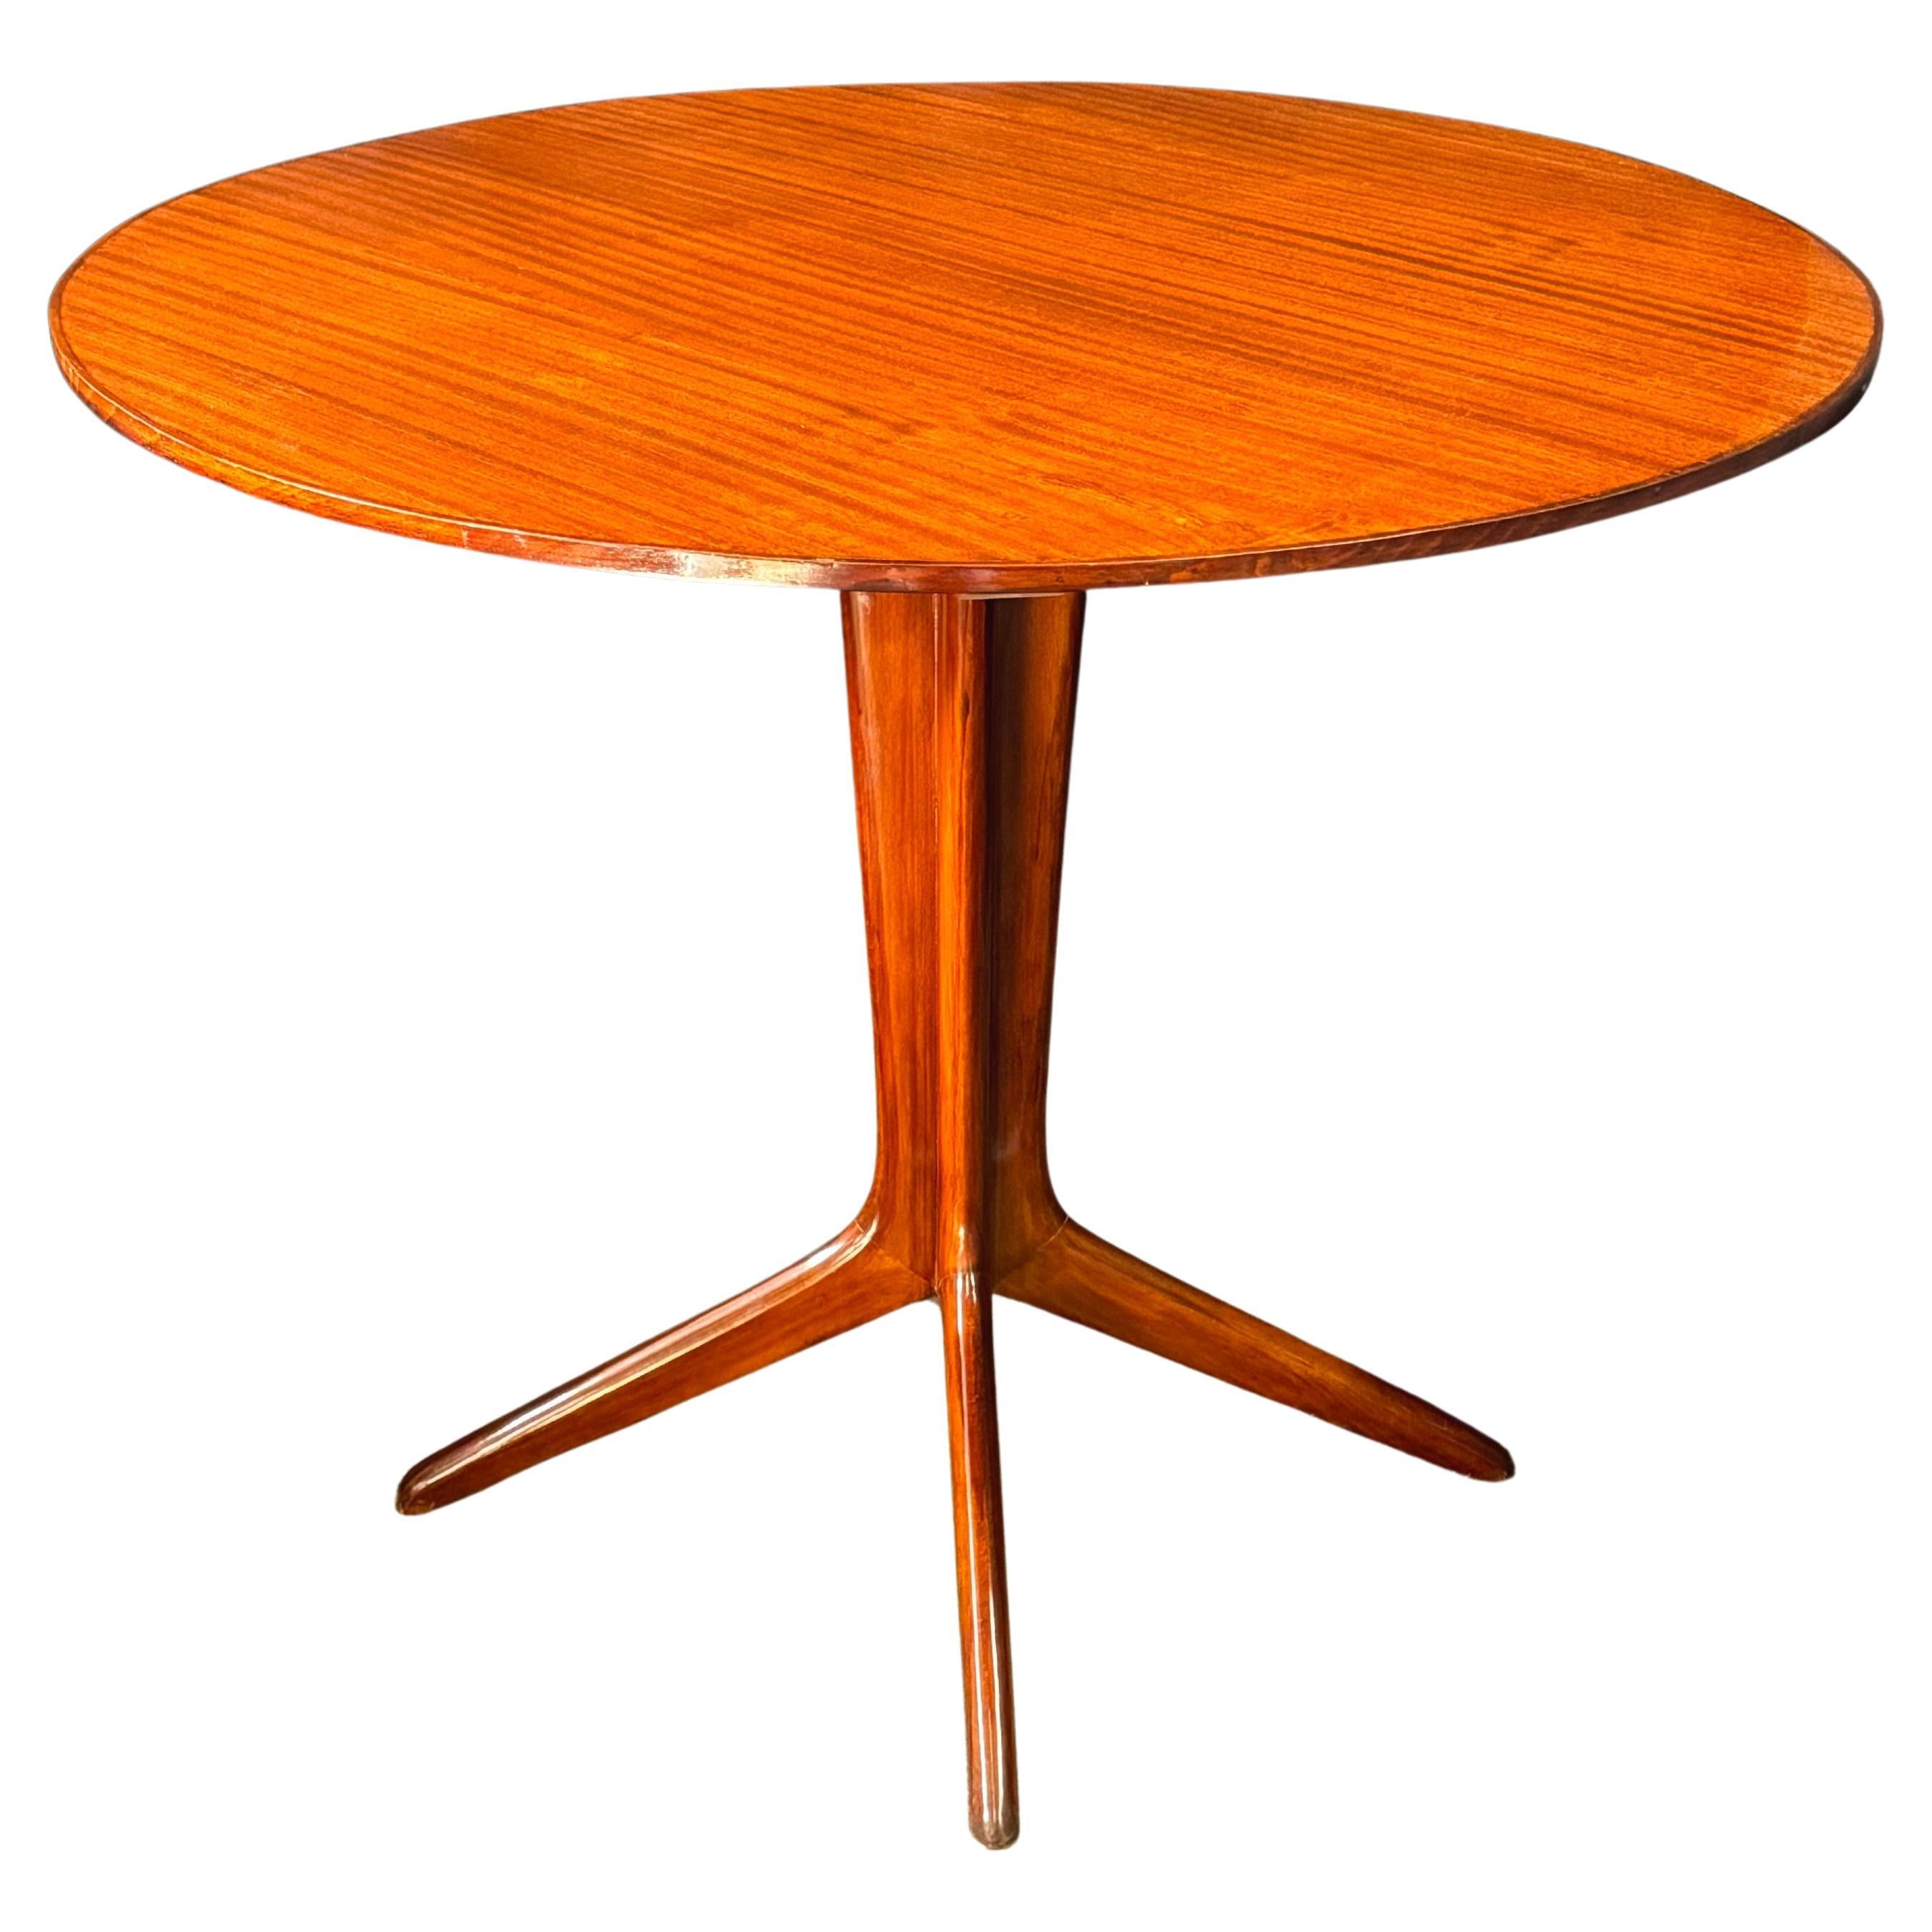 Italian Mid-Century center table attributed to designers Ico and Luisa Parisi with a beautifully grained walnut top having delicate inlay around the outer edge. The iconic pedestal base splays stylishly into four tapered legs. 

The table measures